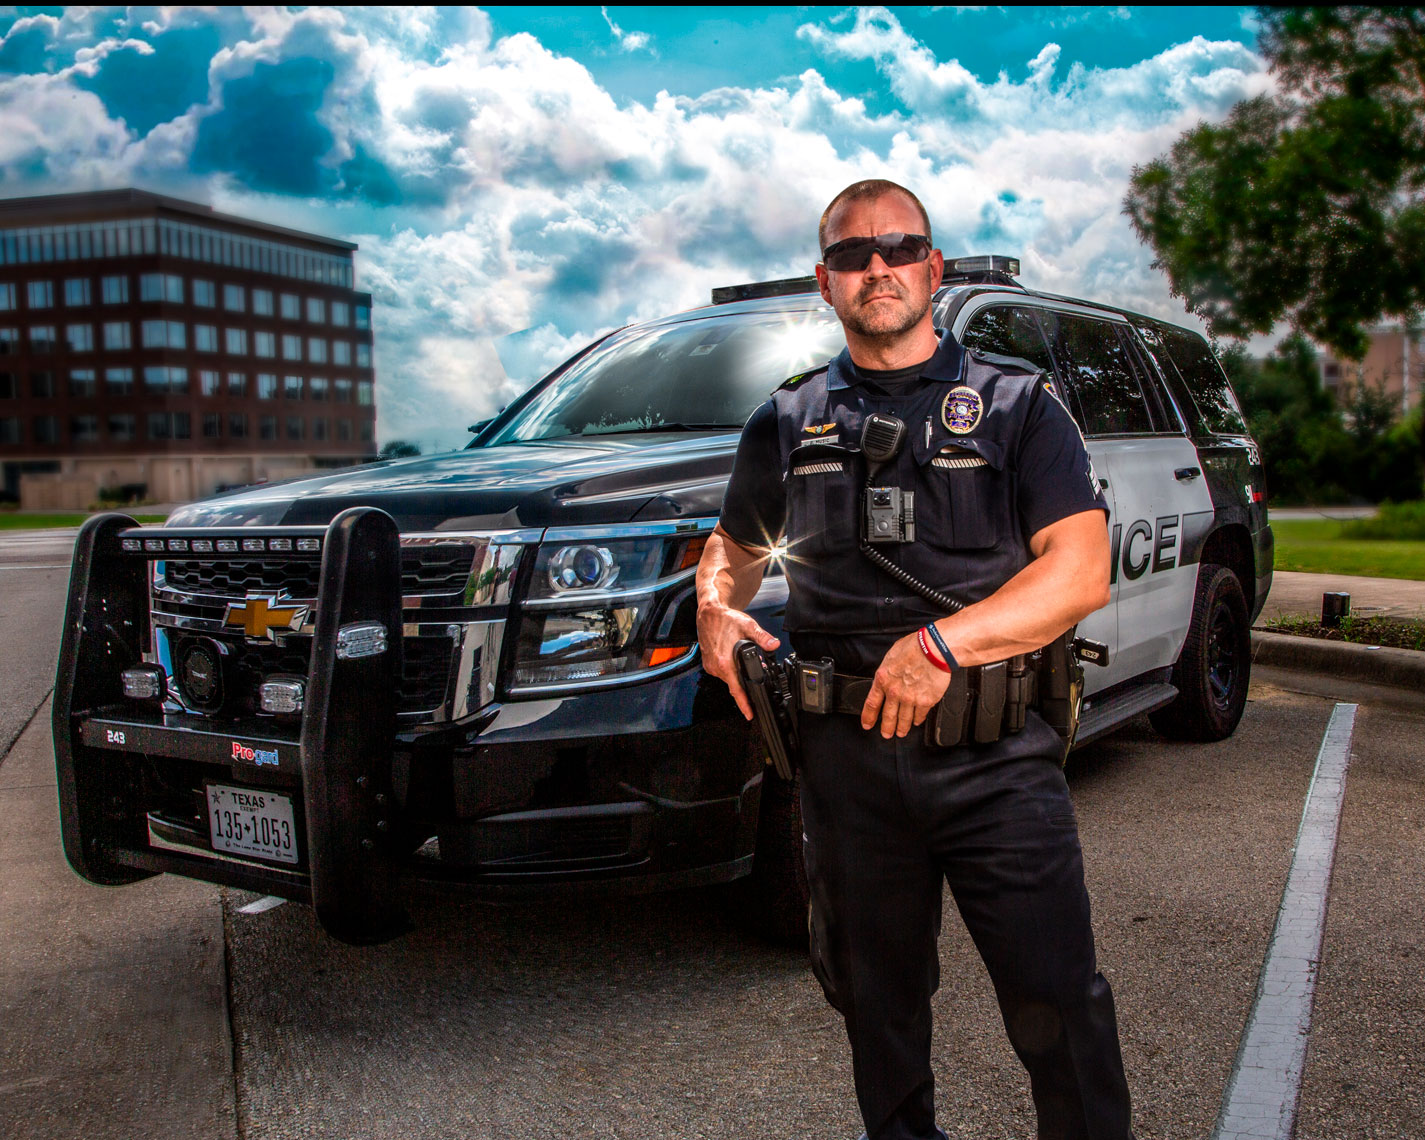 Police Officer photography | by Kate Voskova